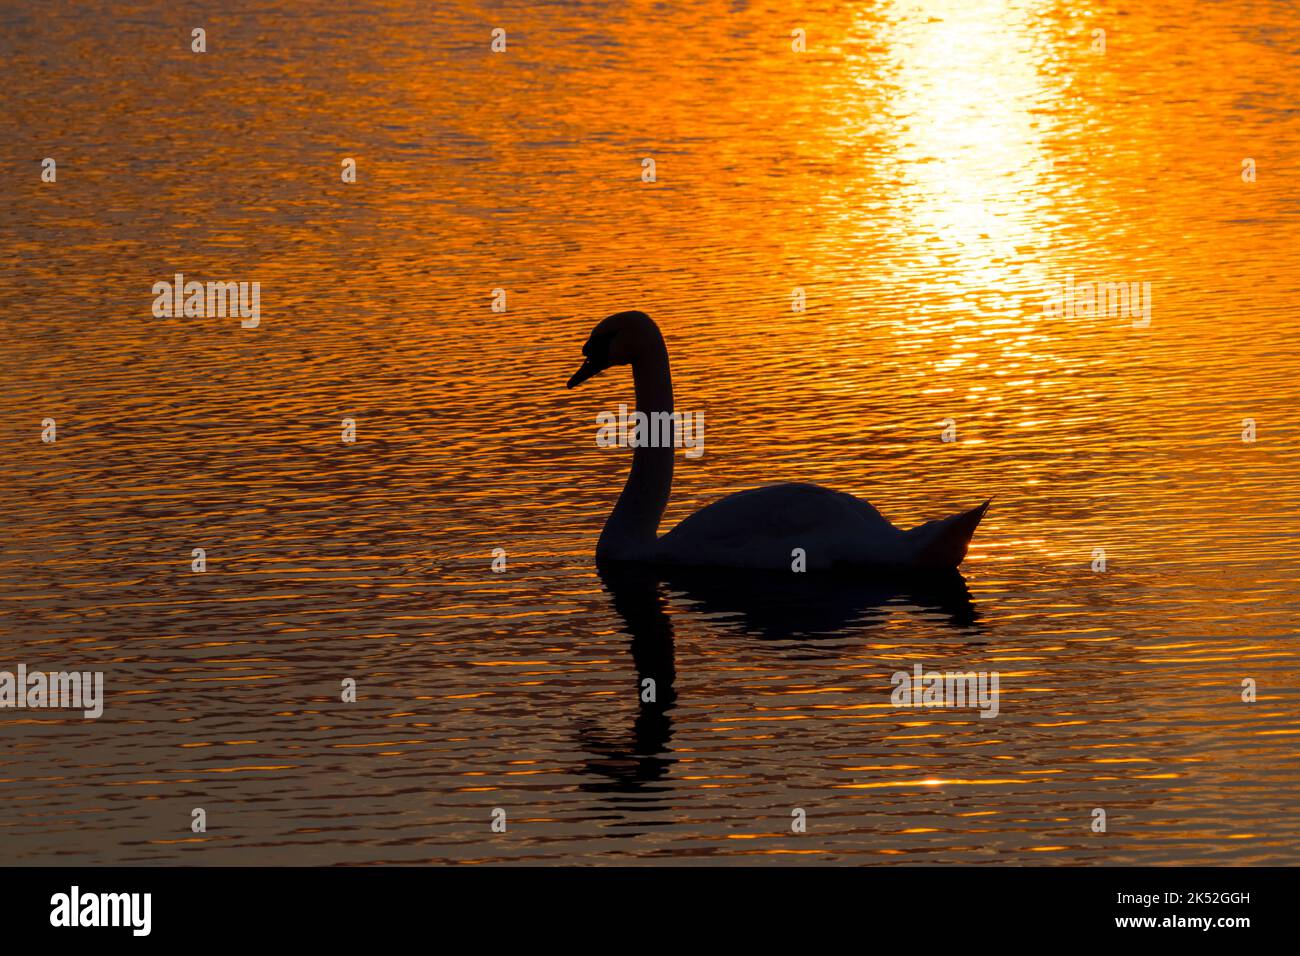 Mute swan (Cygnus olor) swimming in water of lake, silhouetted at sunset, Marquenterre park, Bay of the Somme, France Stock Photo